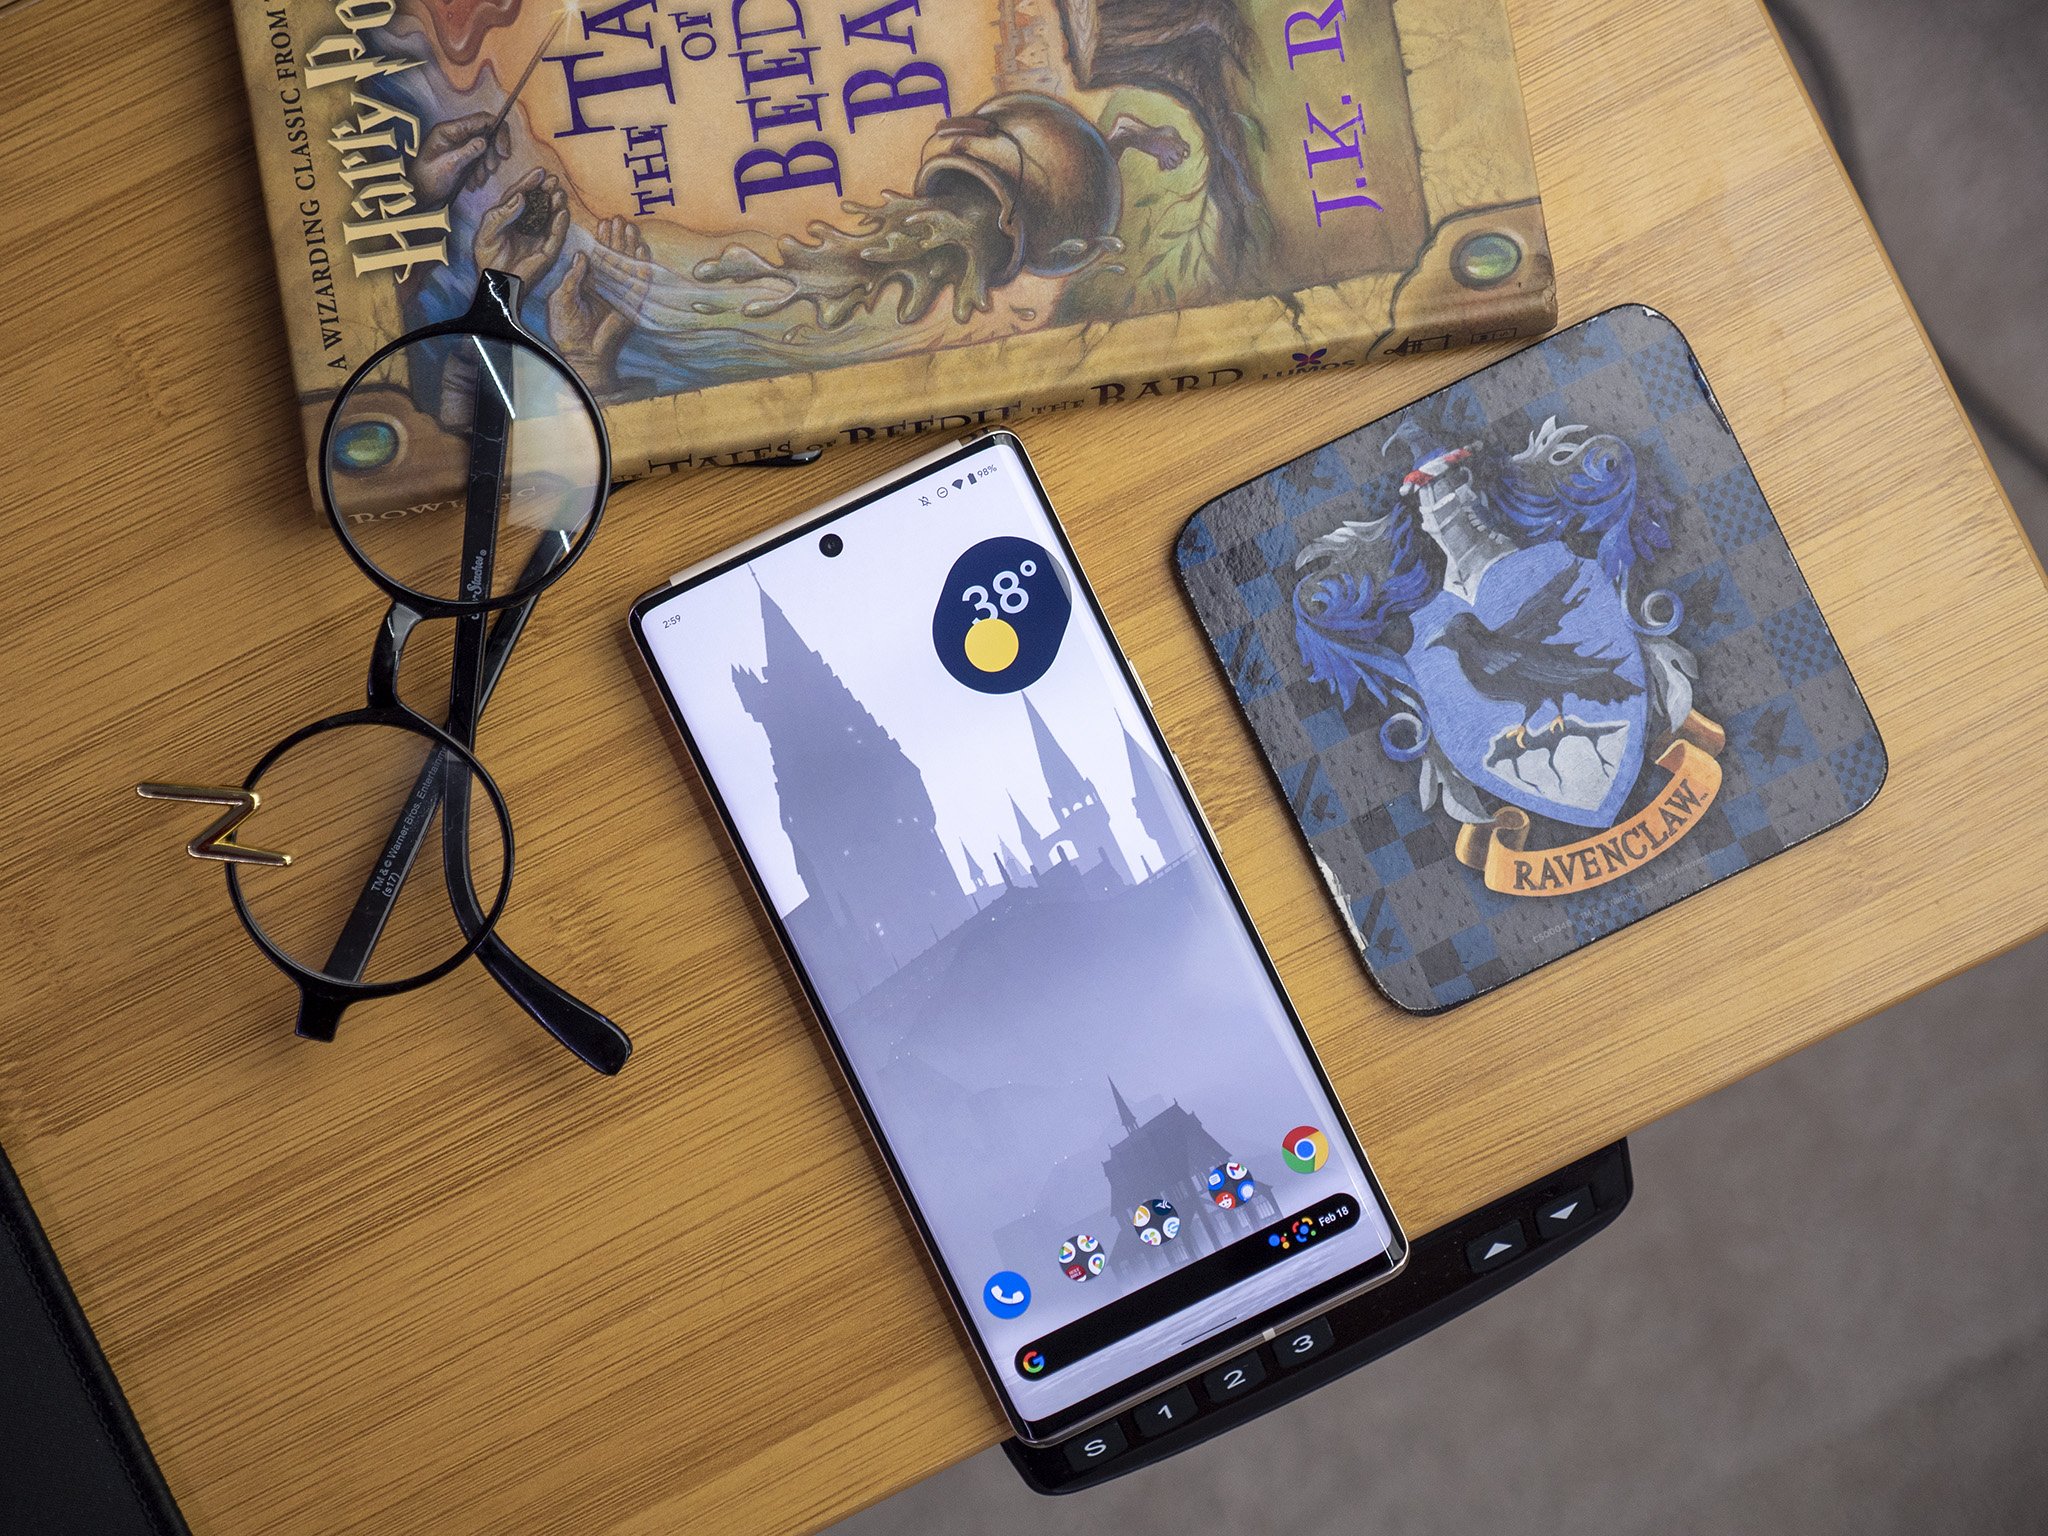 Pixel 7 specs leaked, including Tensor 2 and mystery "Ravenclaw" telephone